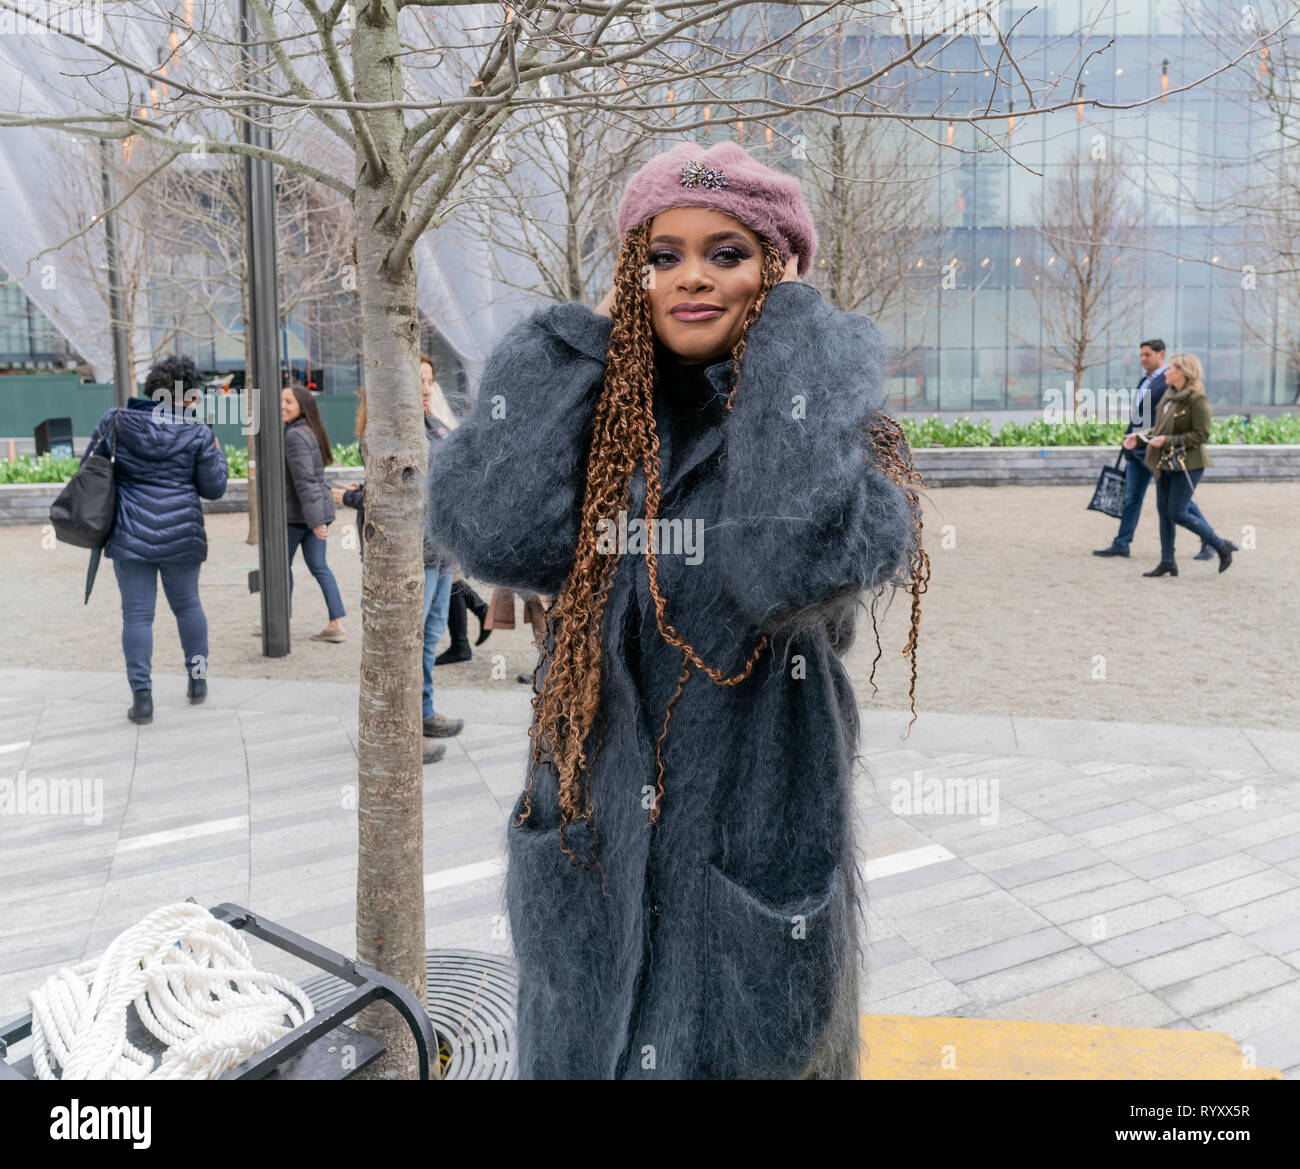 New York, NY - March 15, 2019: Hudson Yards is lagest private development in New York. Andra Day attends opening day at Hudson Yards of Manhattan Credit: lev radin/Alamy Live News Stock Photo